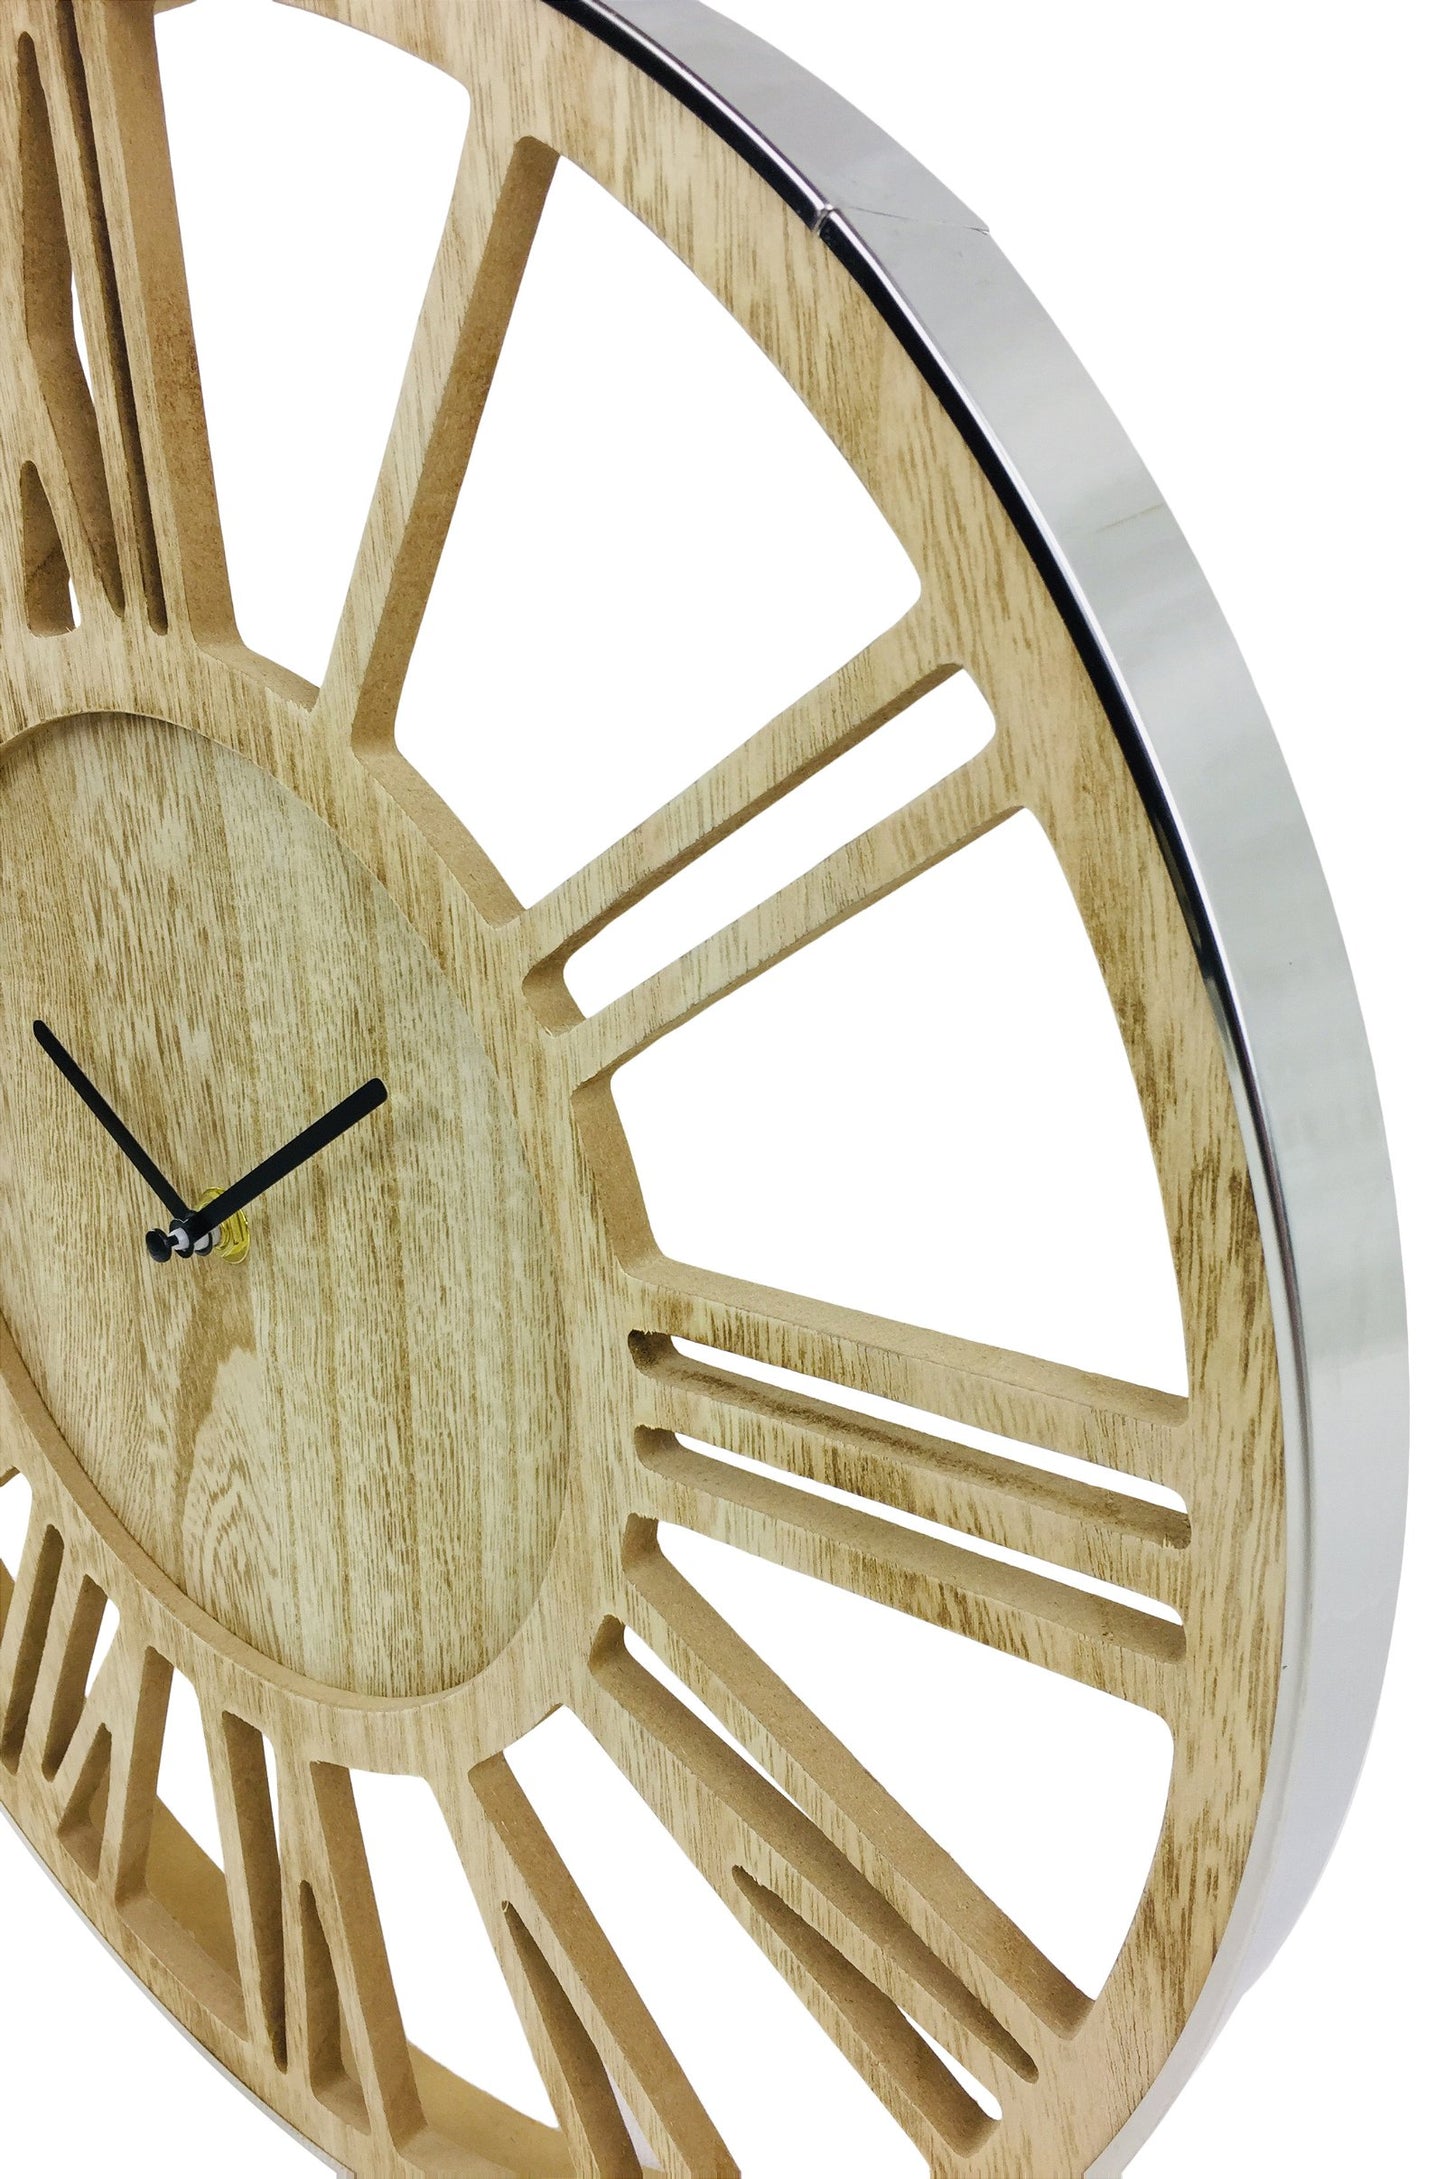 Wooden Silver Clock 40cm - UK Only